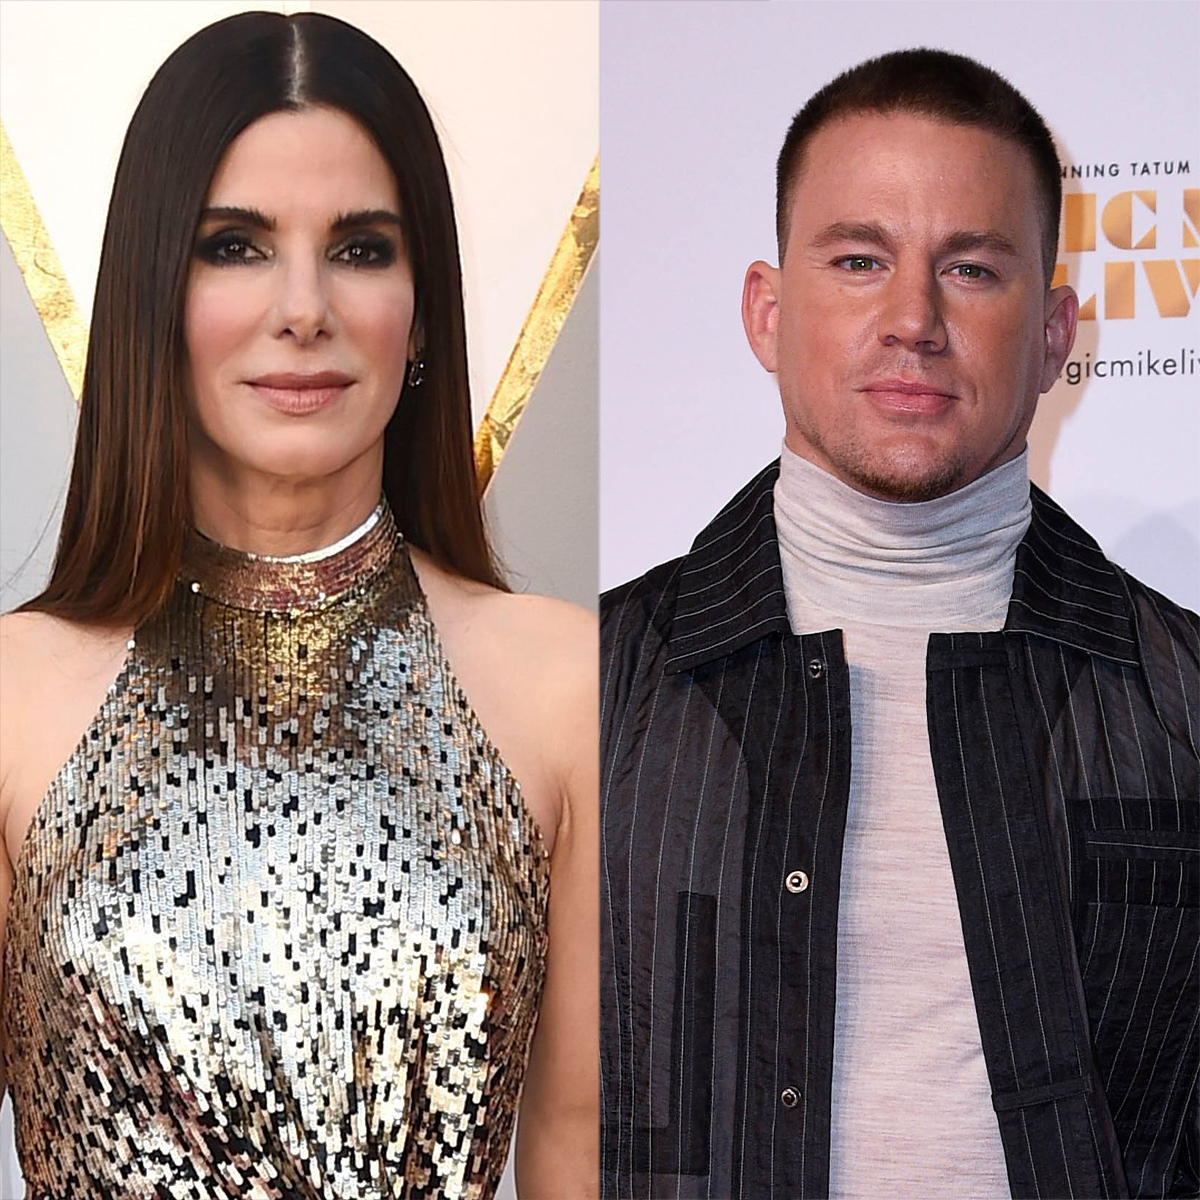 See Channing Tatum Tease Co-Star Sandra Bullock About â€œWatching Porn\